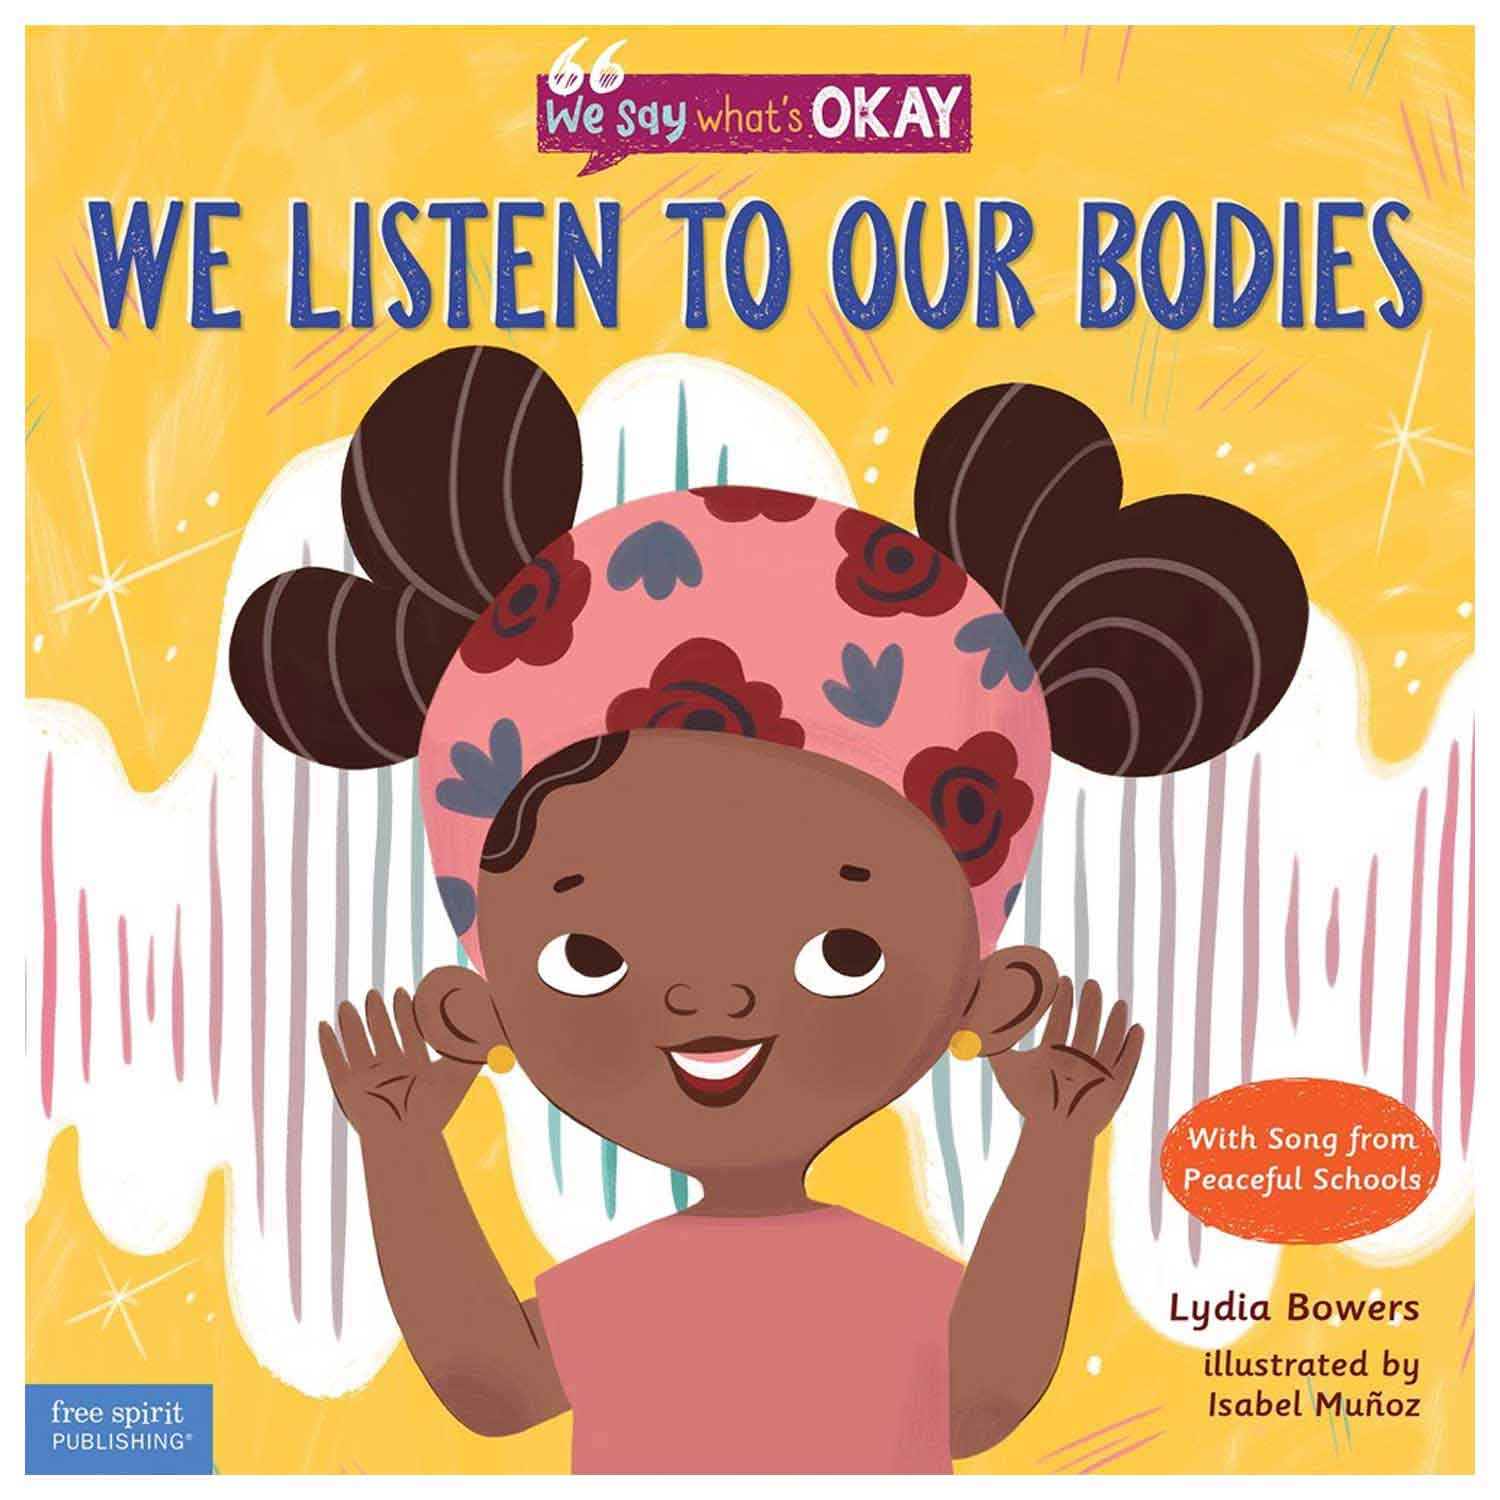 We Listen to Our Bodies